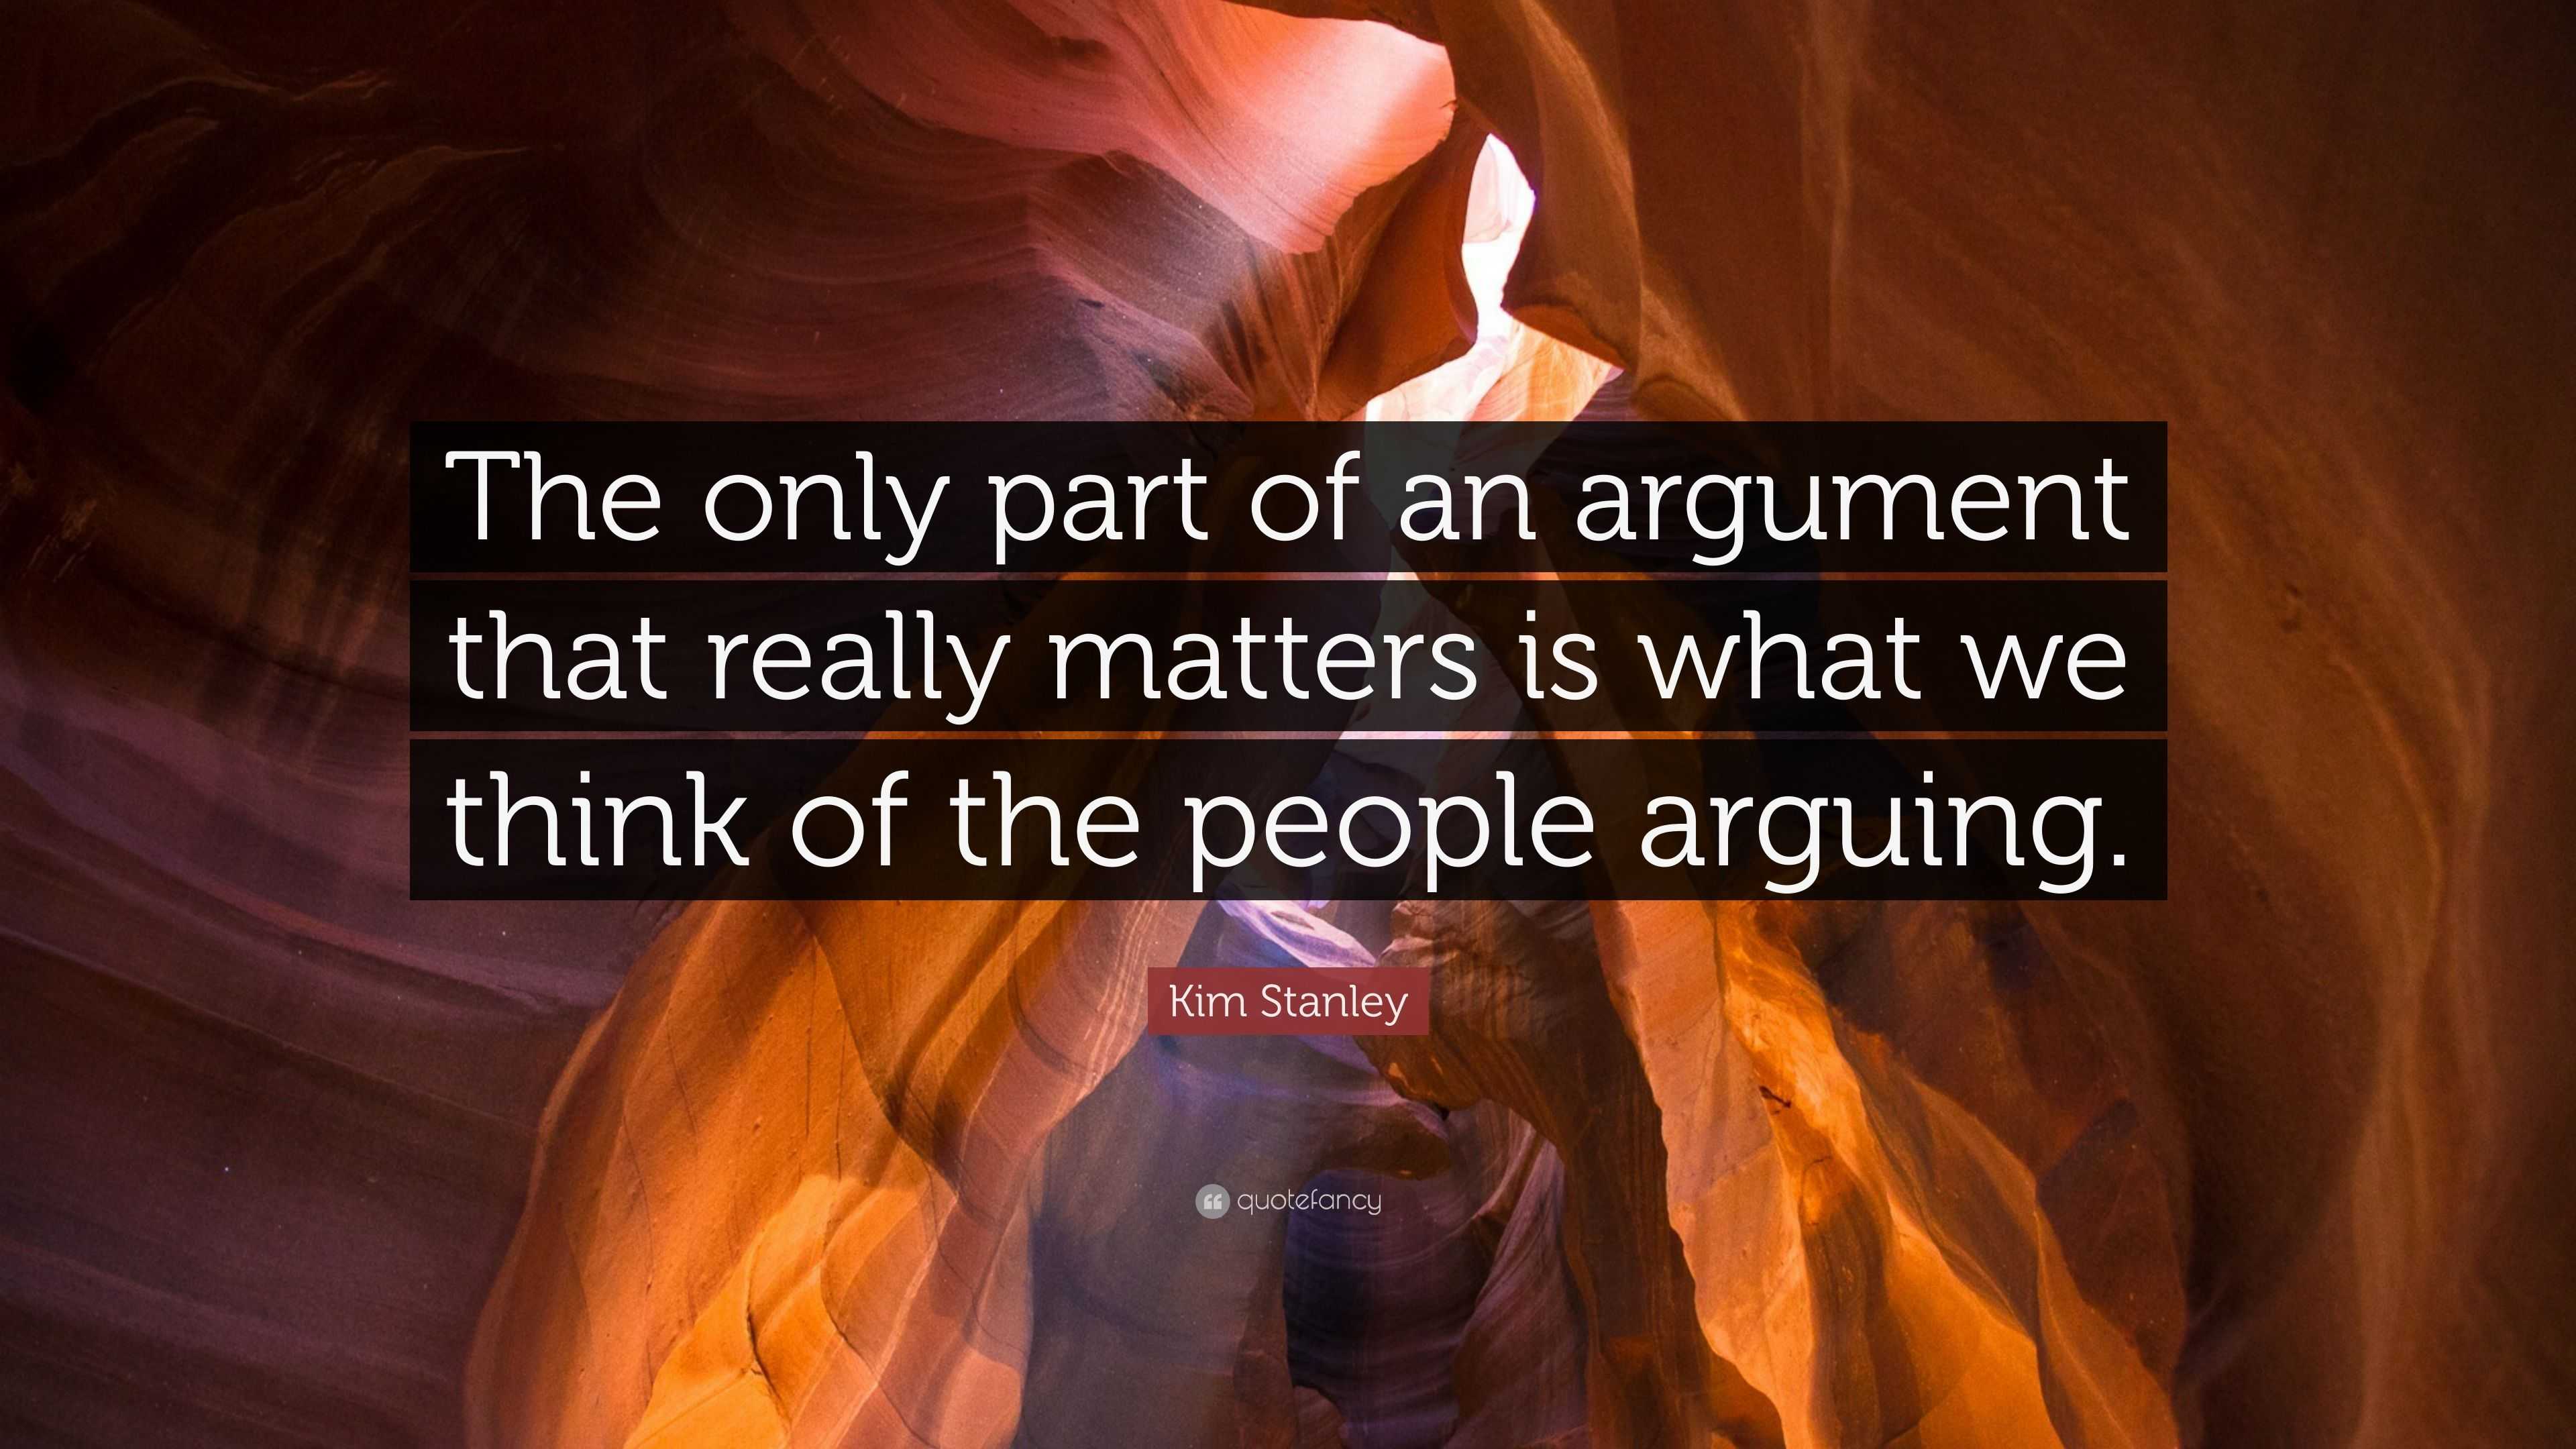 Kim Stanley Quote: “The only part of an argument that really matters is ...